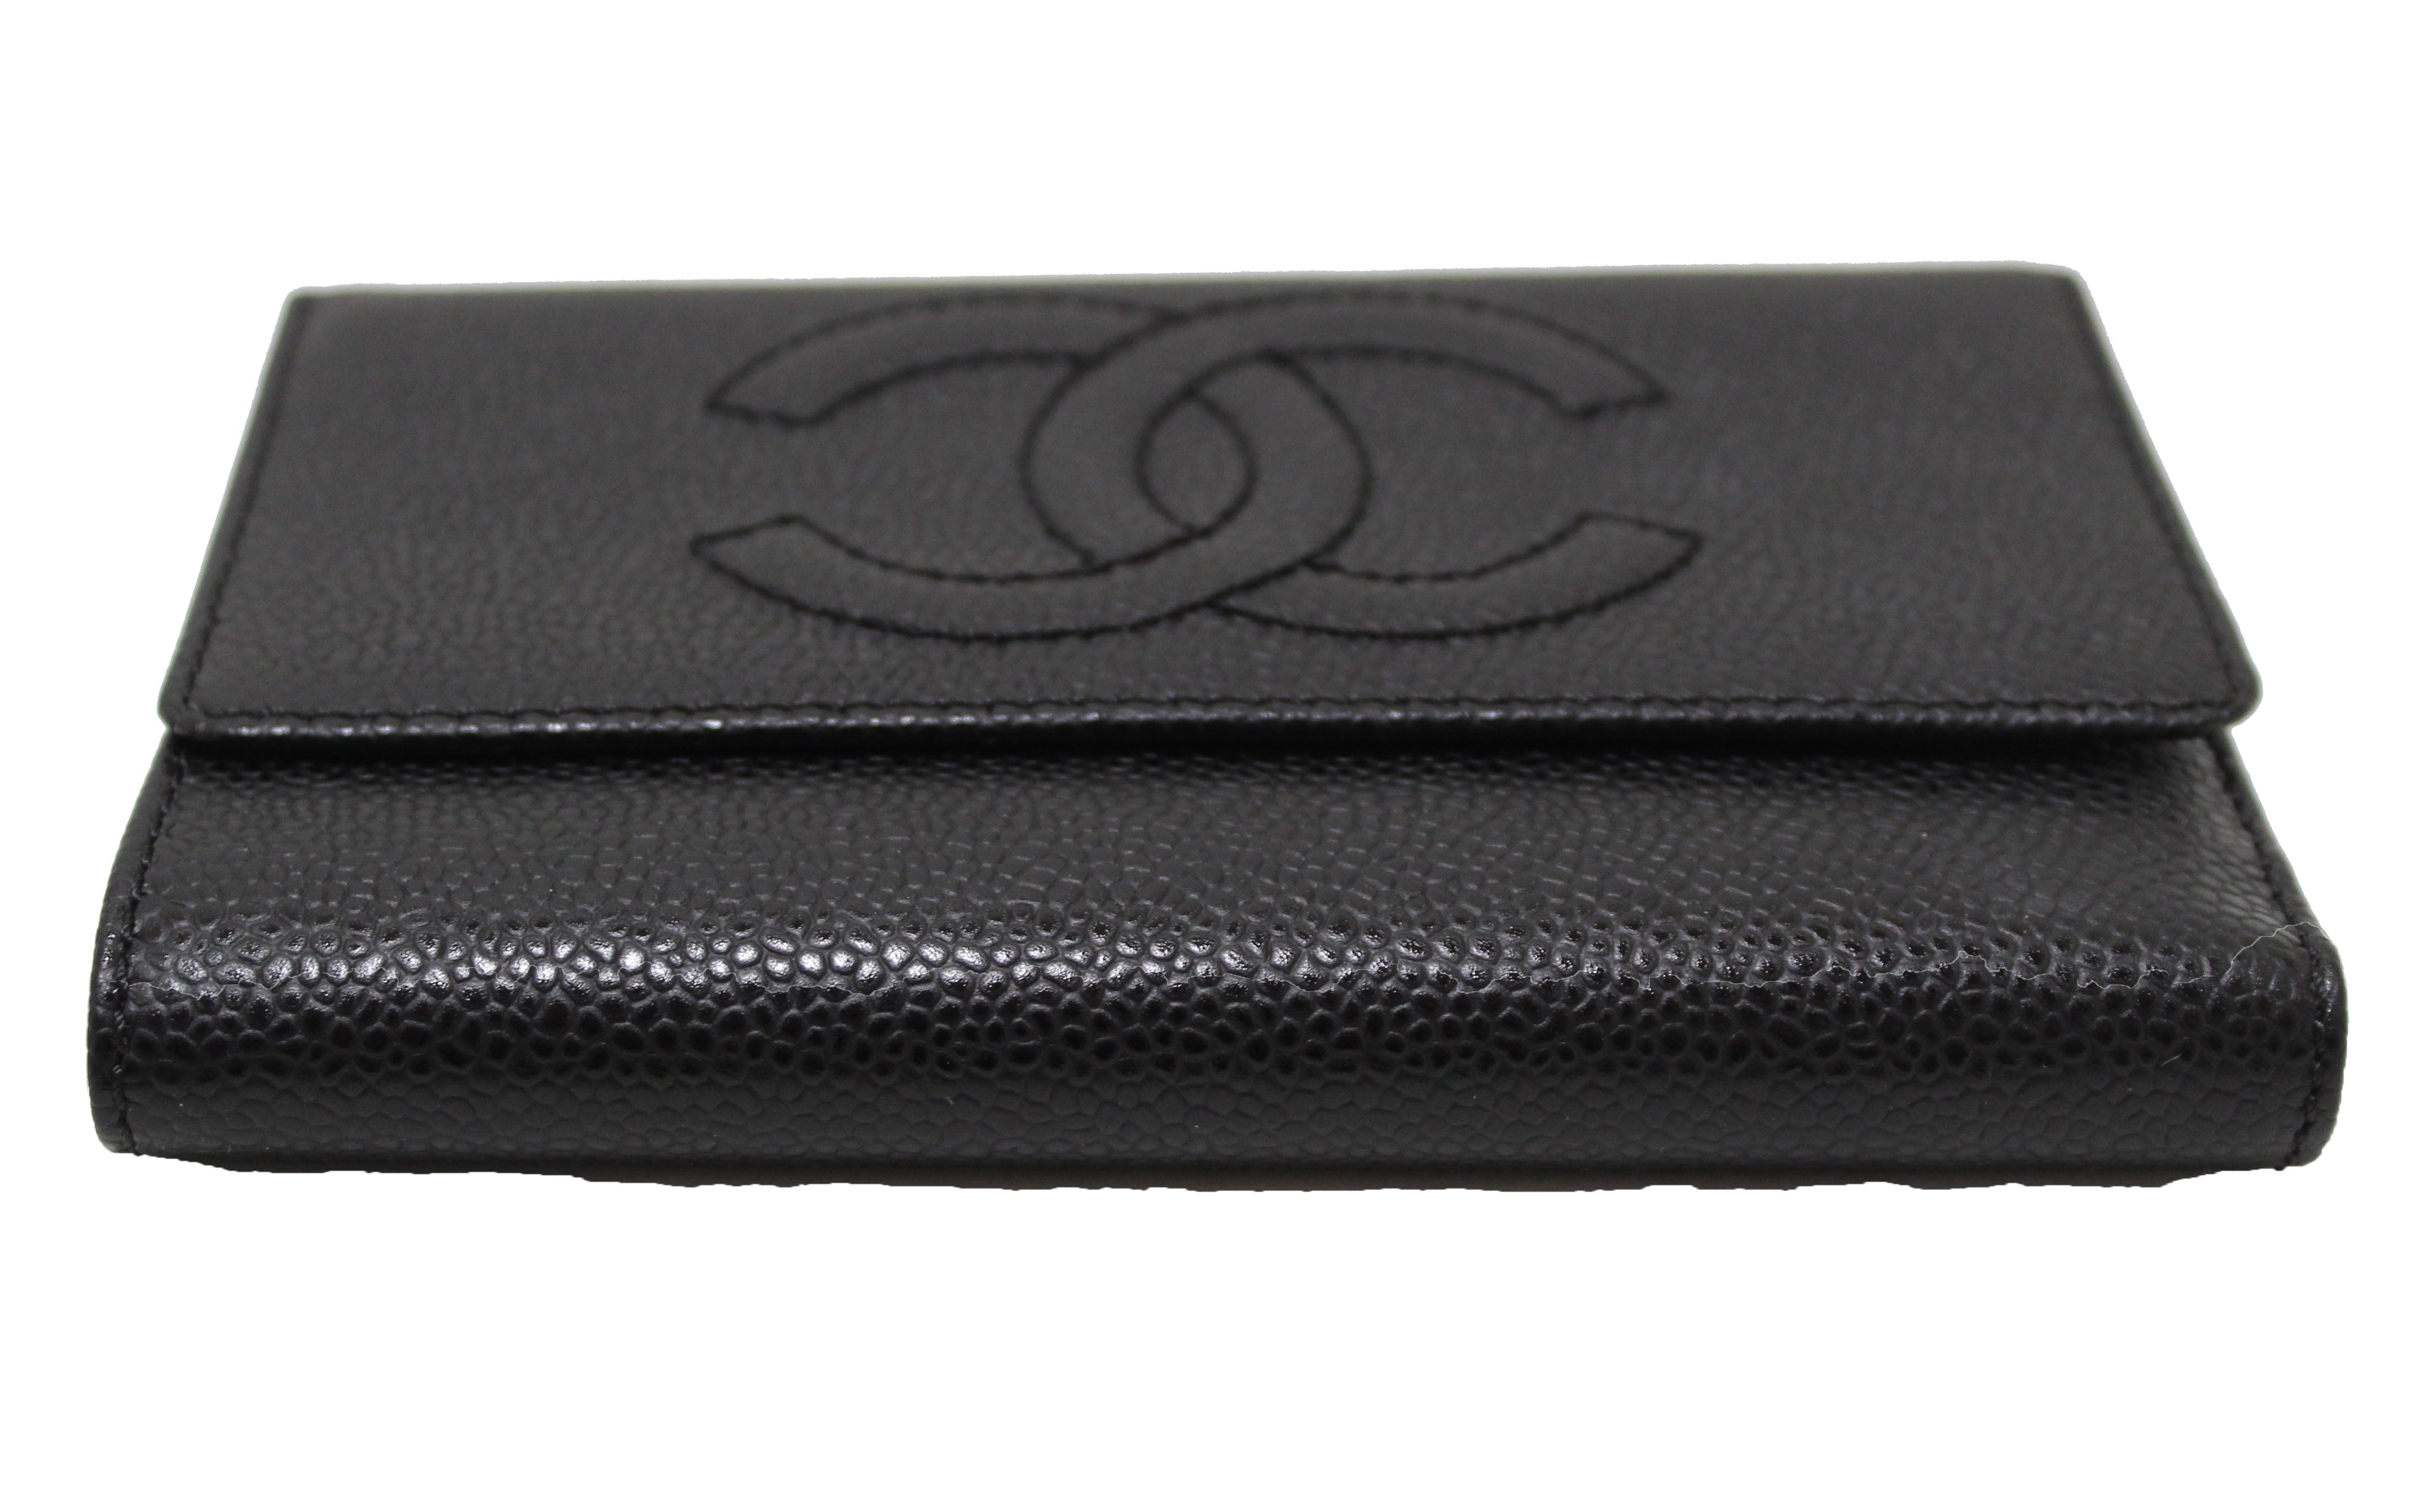 CHANEL, Bags, Chanel Cc Bifold Caviar Leather Wallet